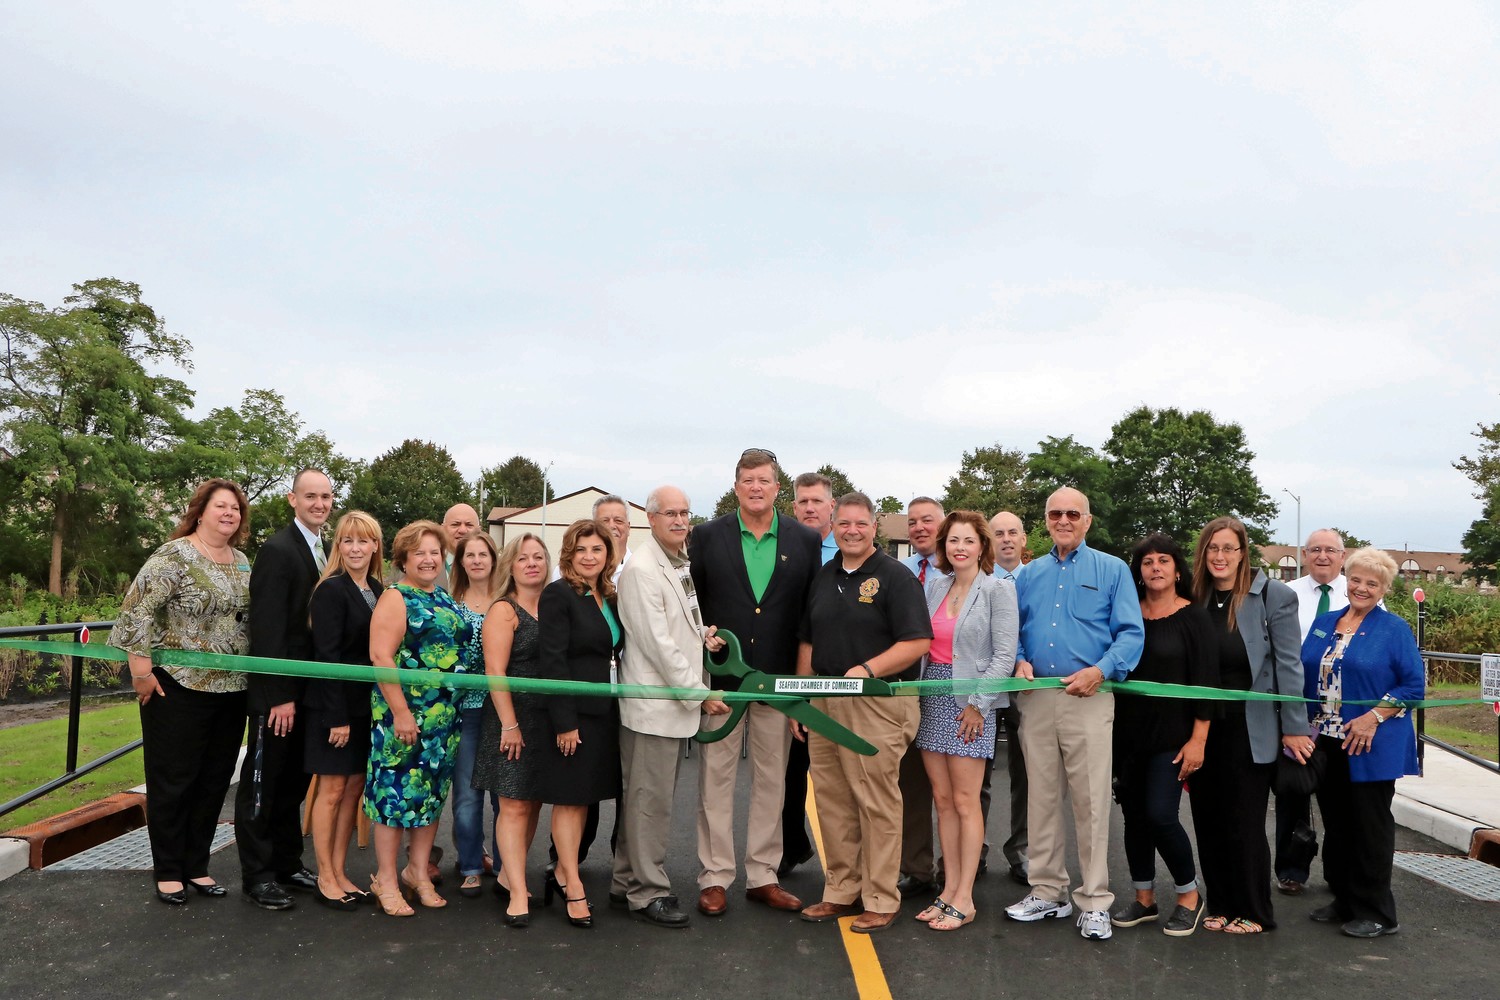 Seaford School District officials, local elected leaders, parents and community members recently celebrated the completion of the emergency access road at Harbor Elementary School in Seaford.